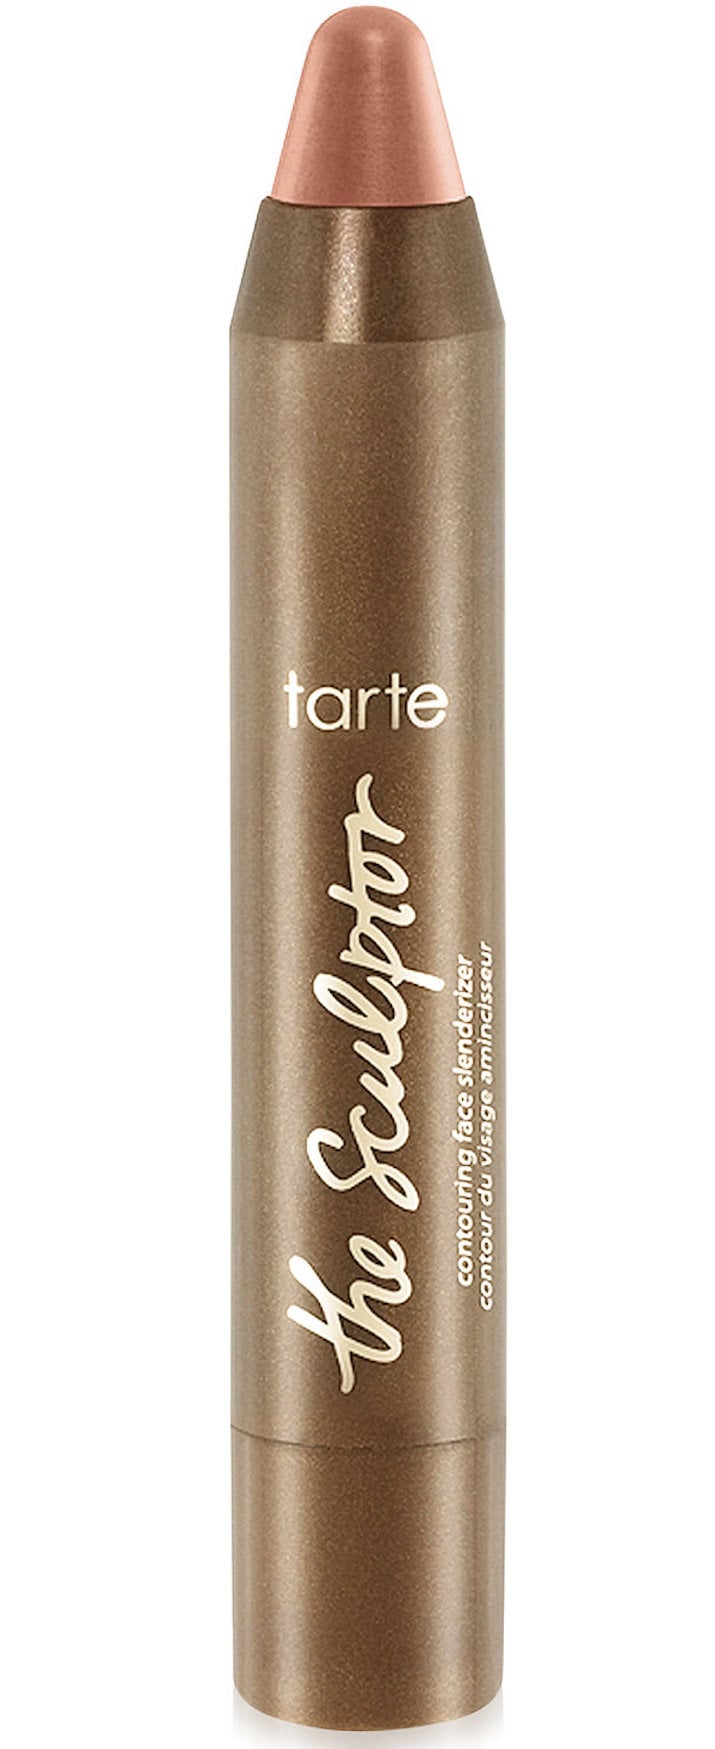 Tarte The Sculptor Amazonian Clay Contouring Face Slenderizer